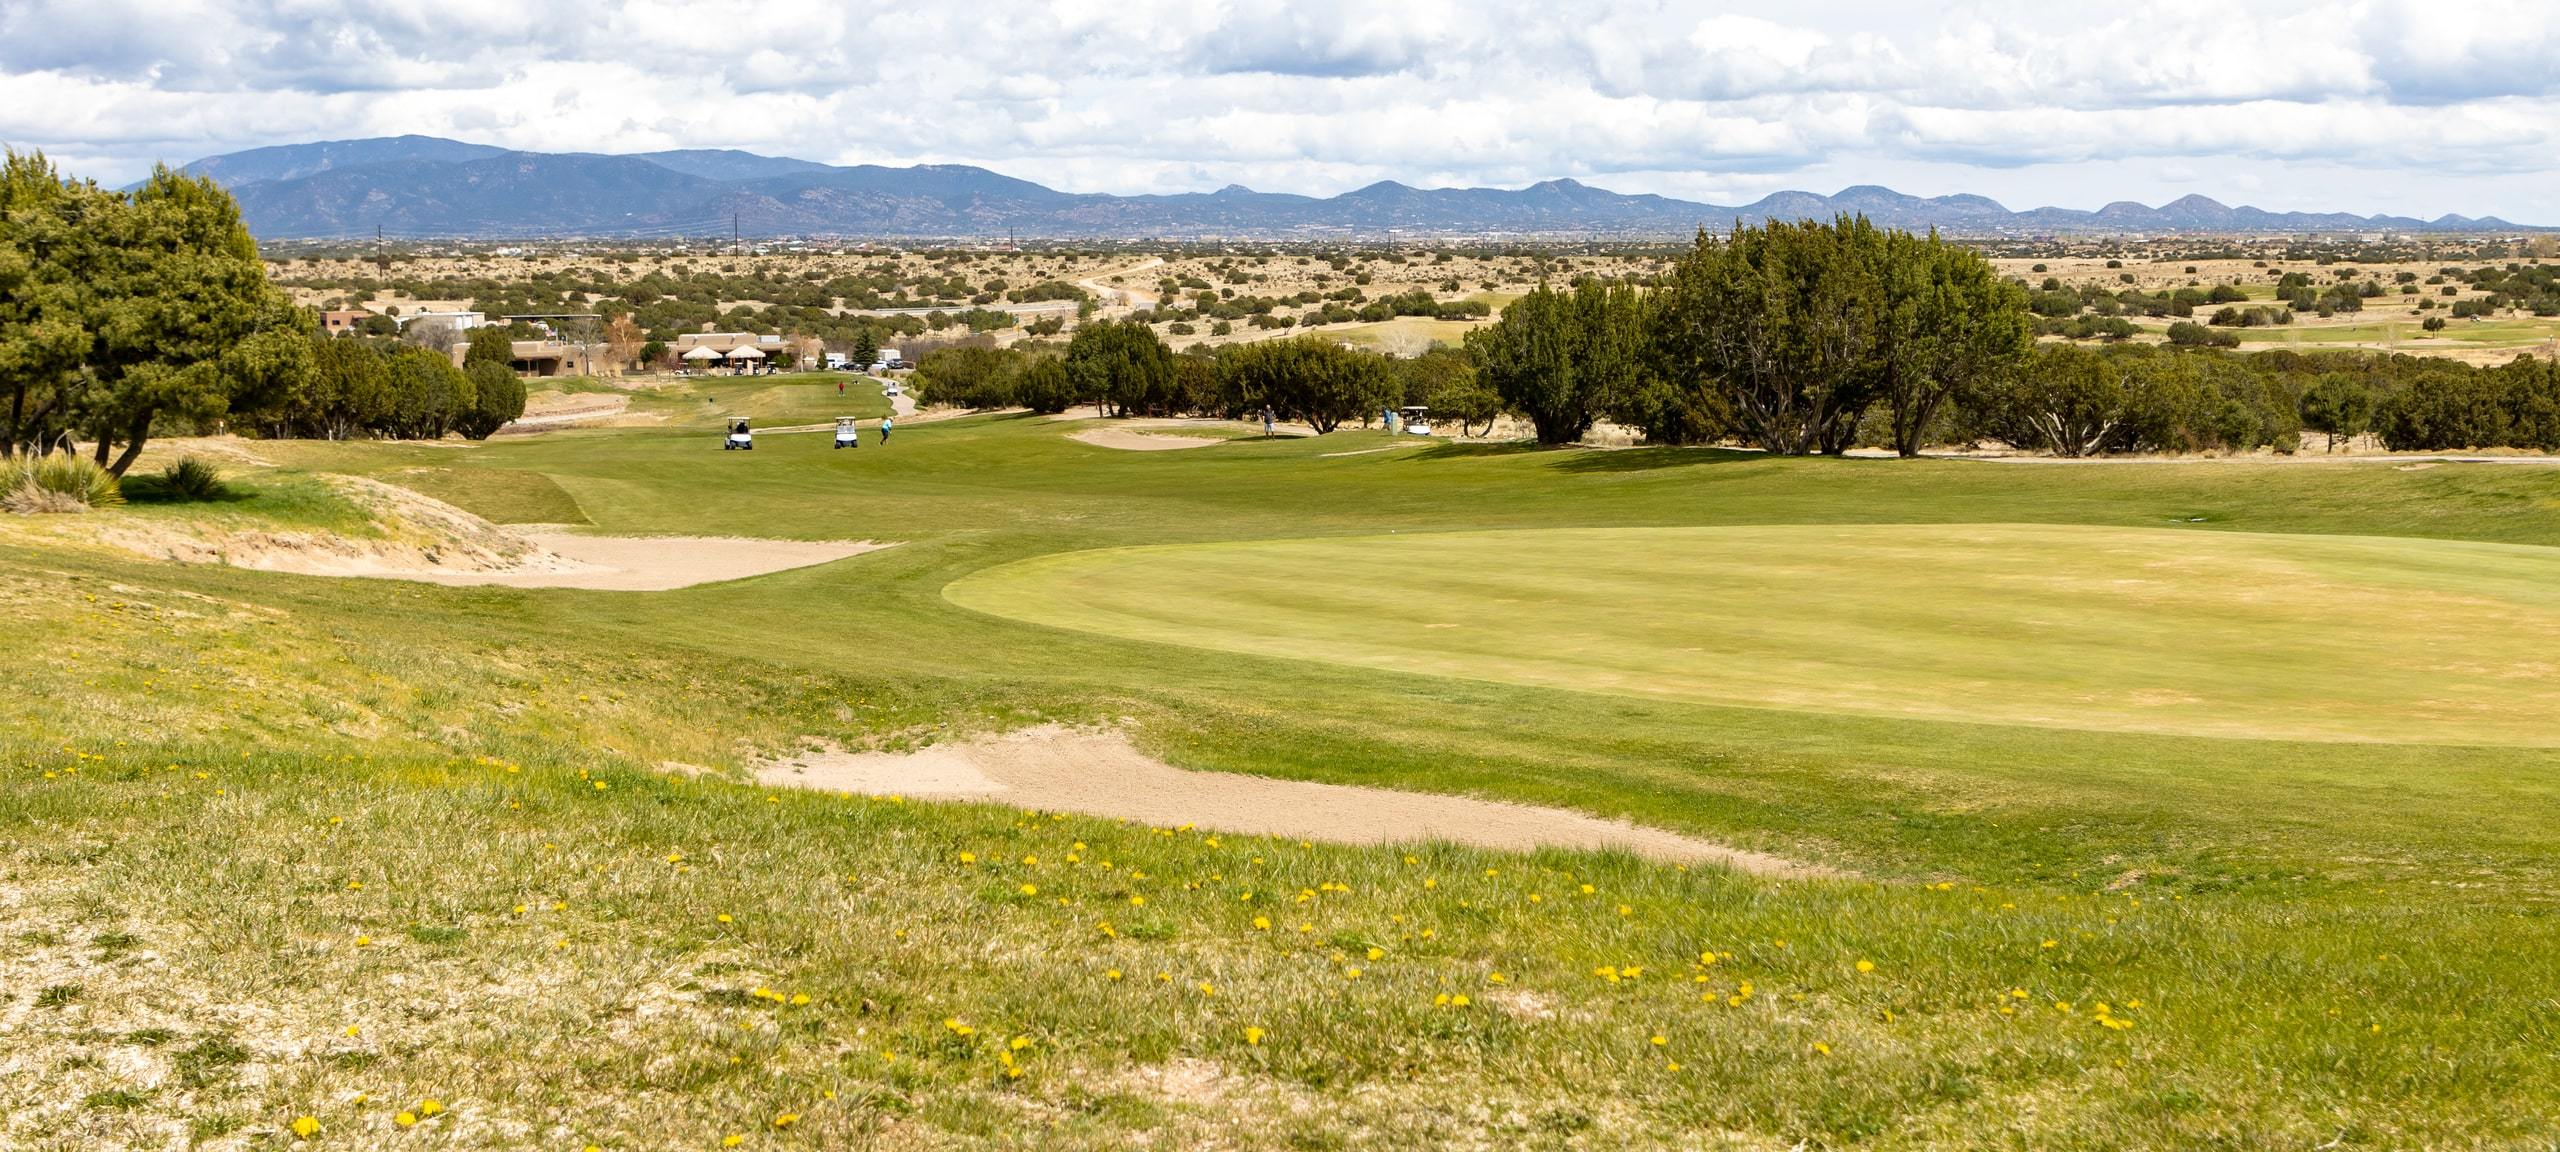 Golf course and mountain ranges, typical of Las Campanas, NM